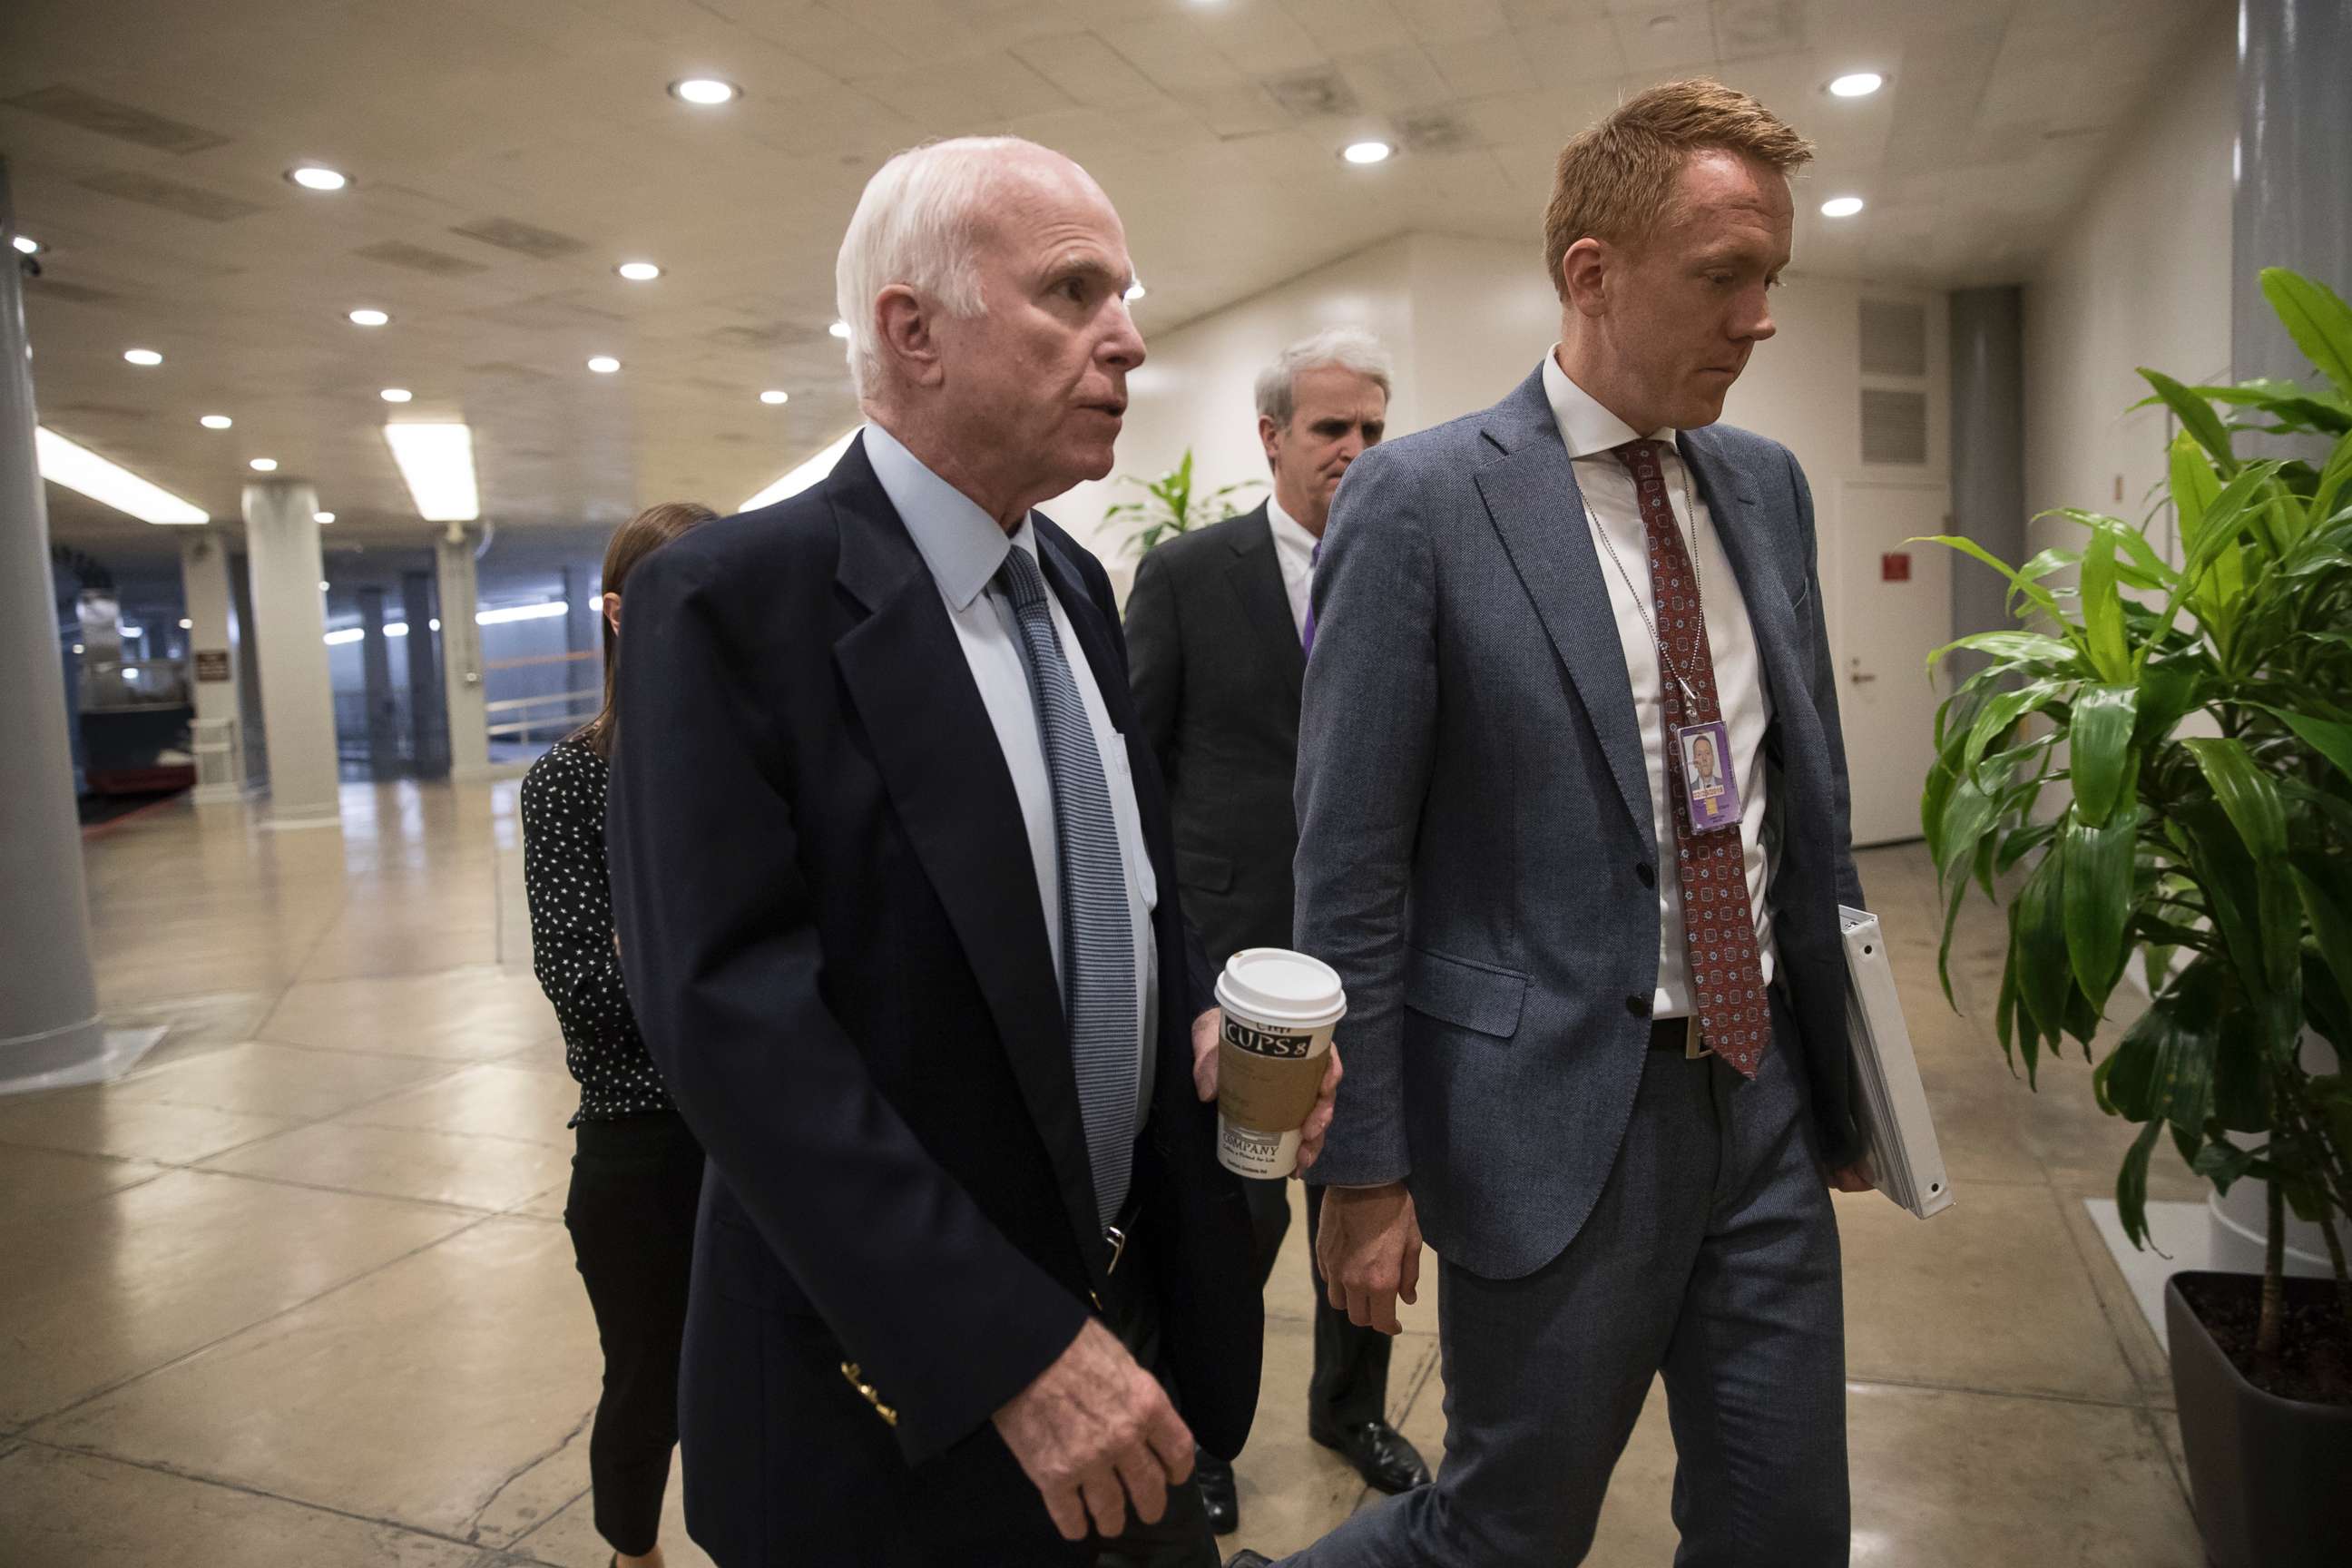 PHOTO: Sen. John McCain, chairman of the Senate Armed Services Committee, arrives for a closed-door briefing on the situation in Niger where four U.S. soldiers were killed in an ambush earlier this month, on Capitol Hill in Washington, Oct. 26, 2017.